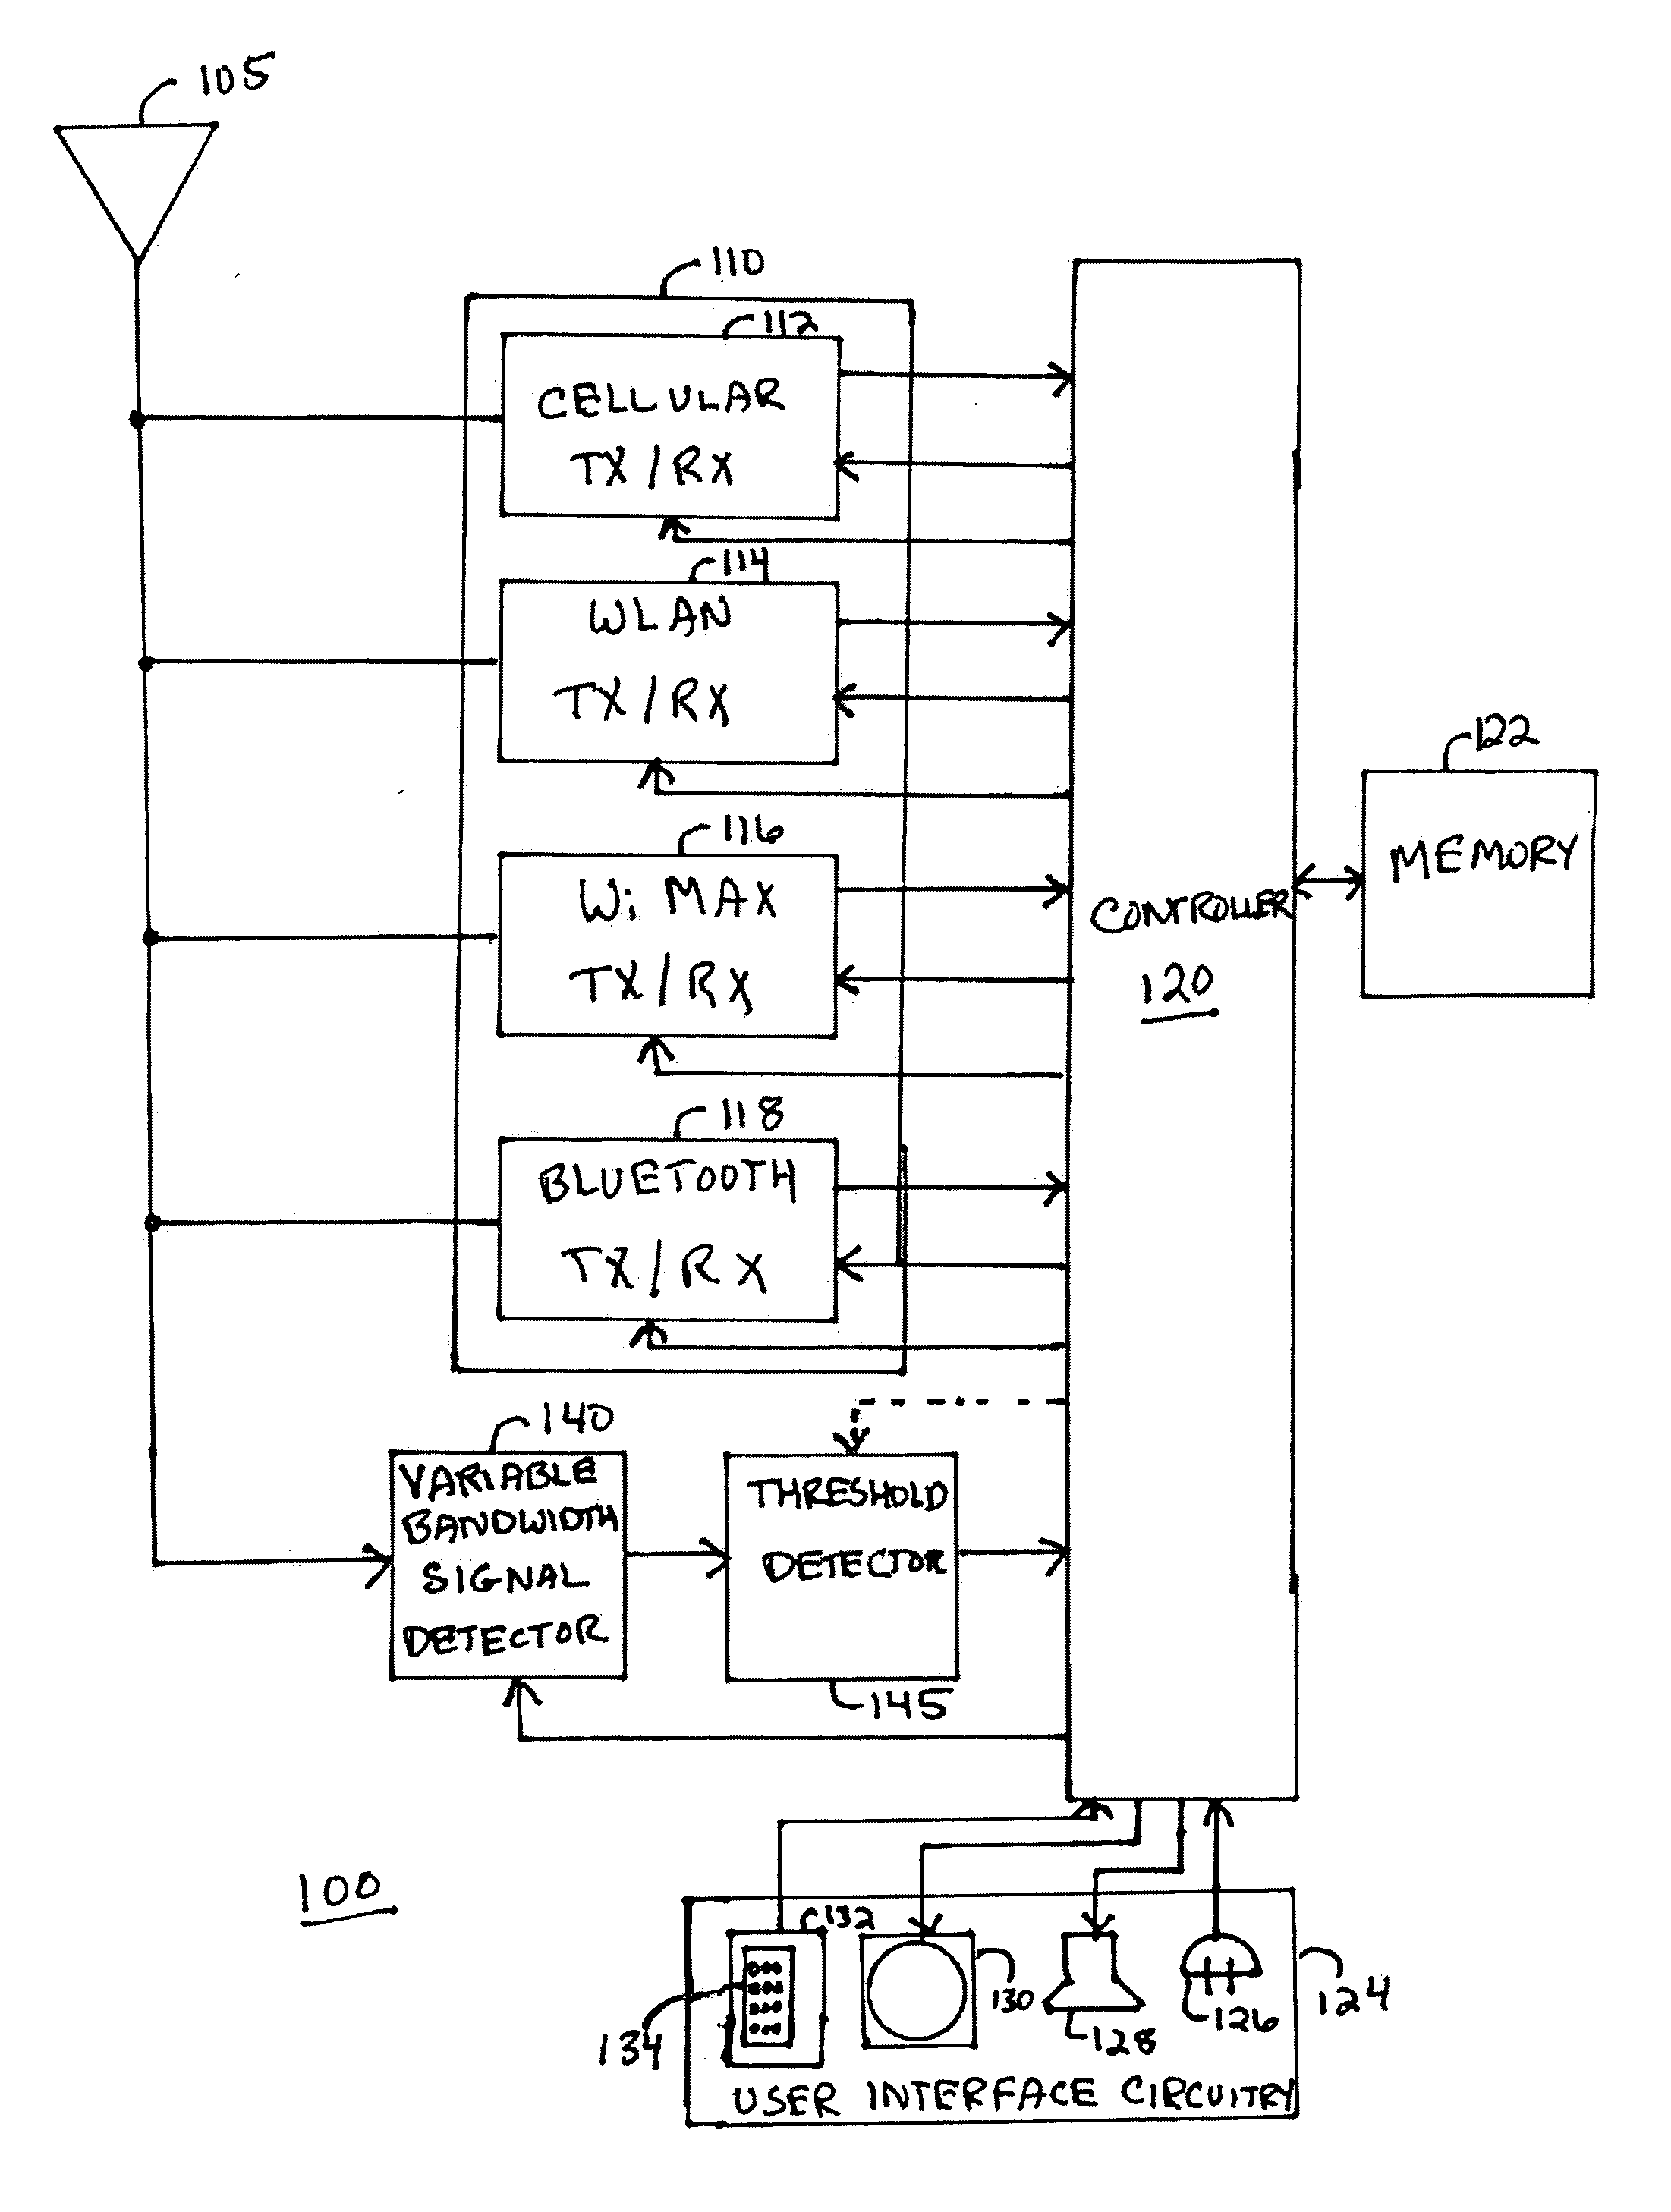 Method and apparatus for extending network discovery range